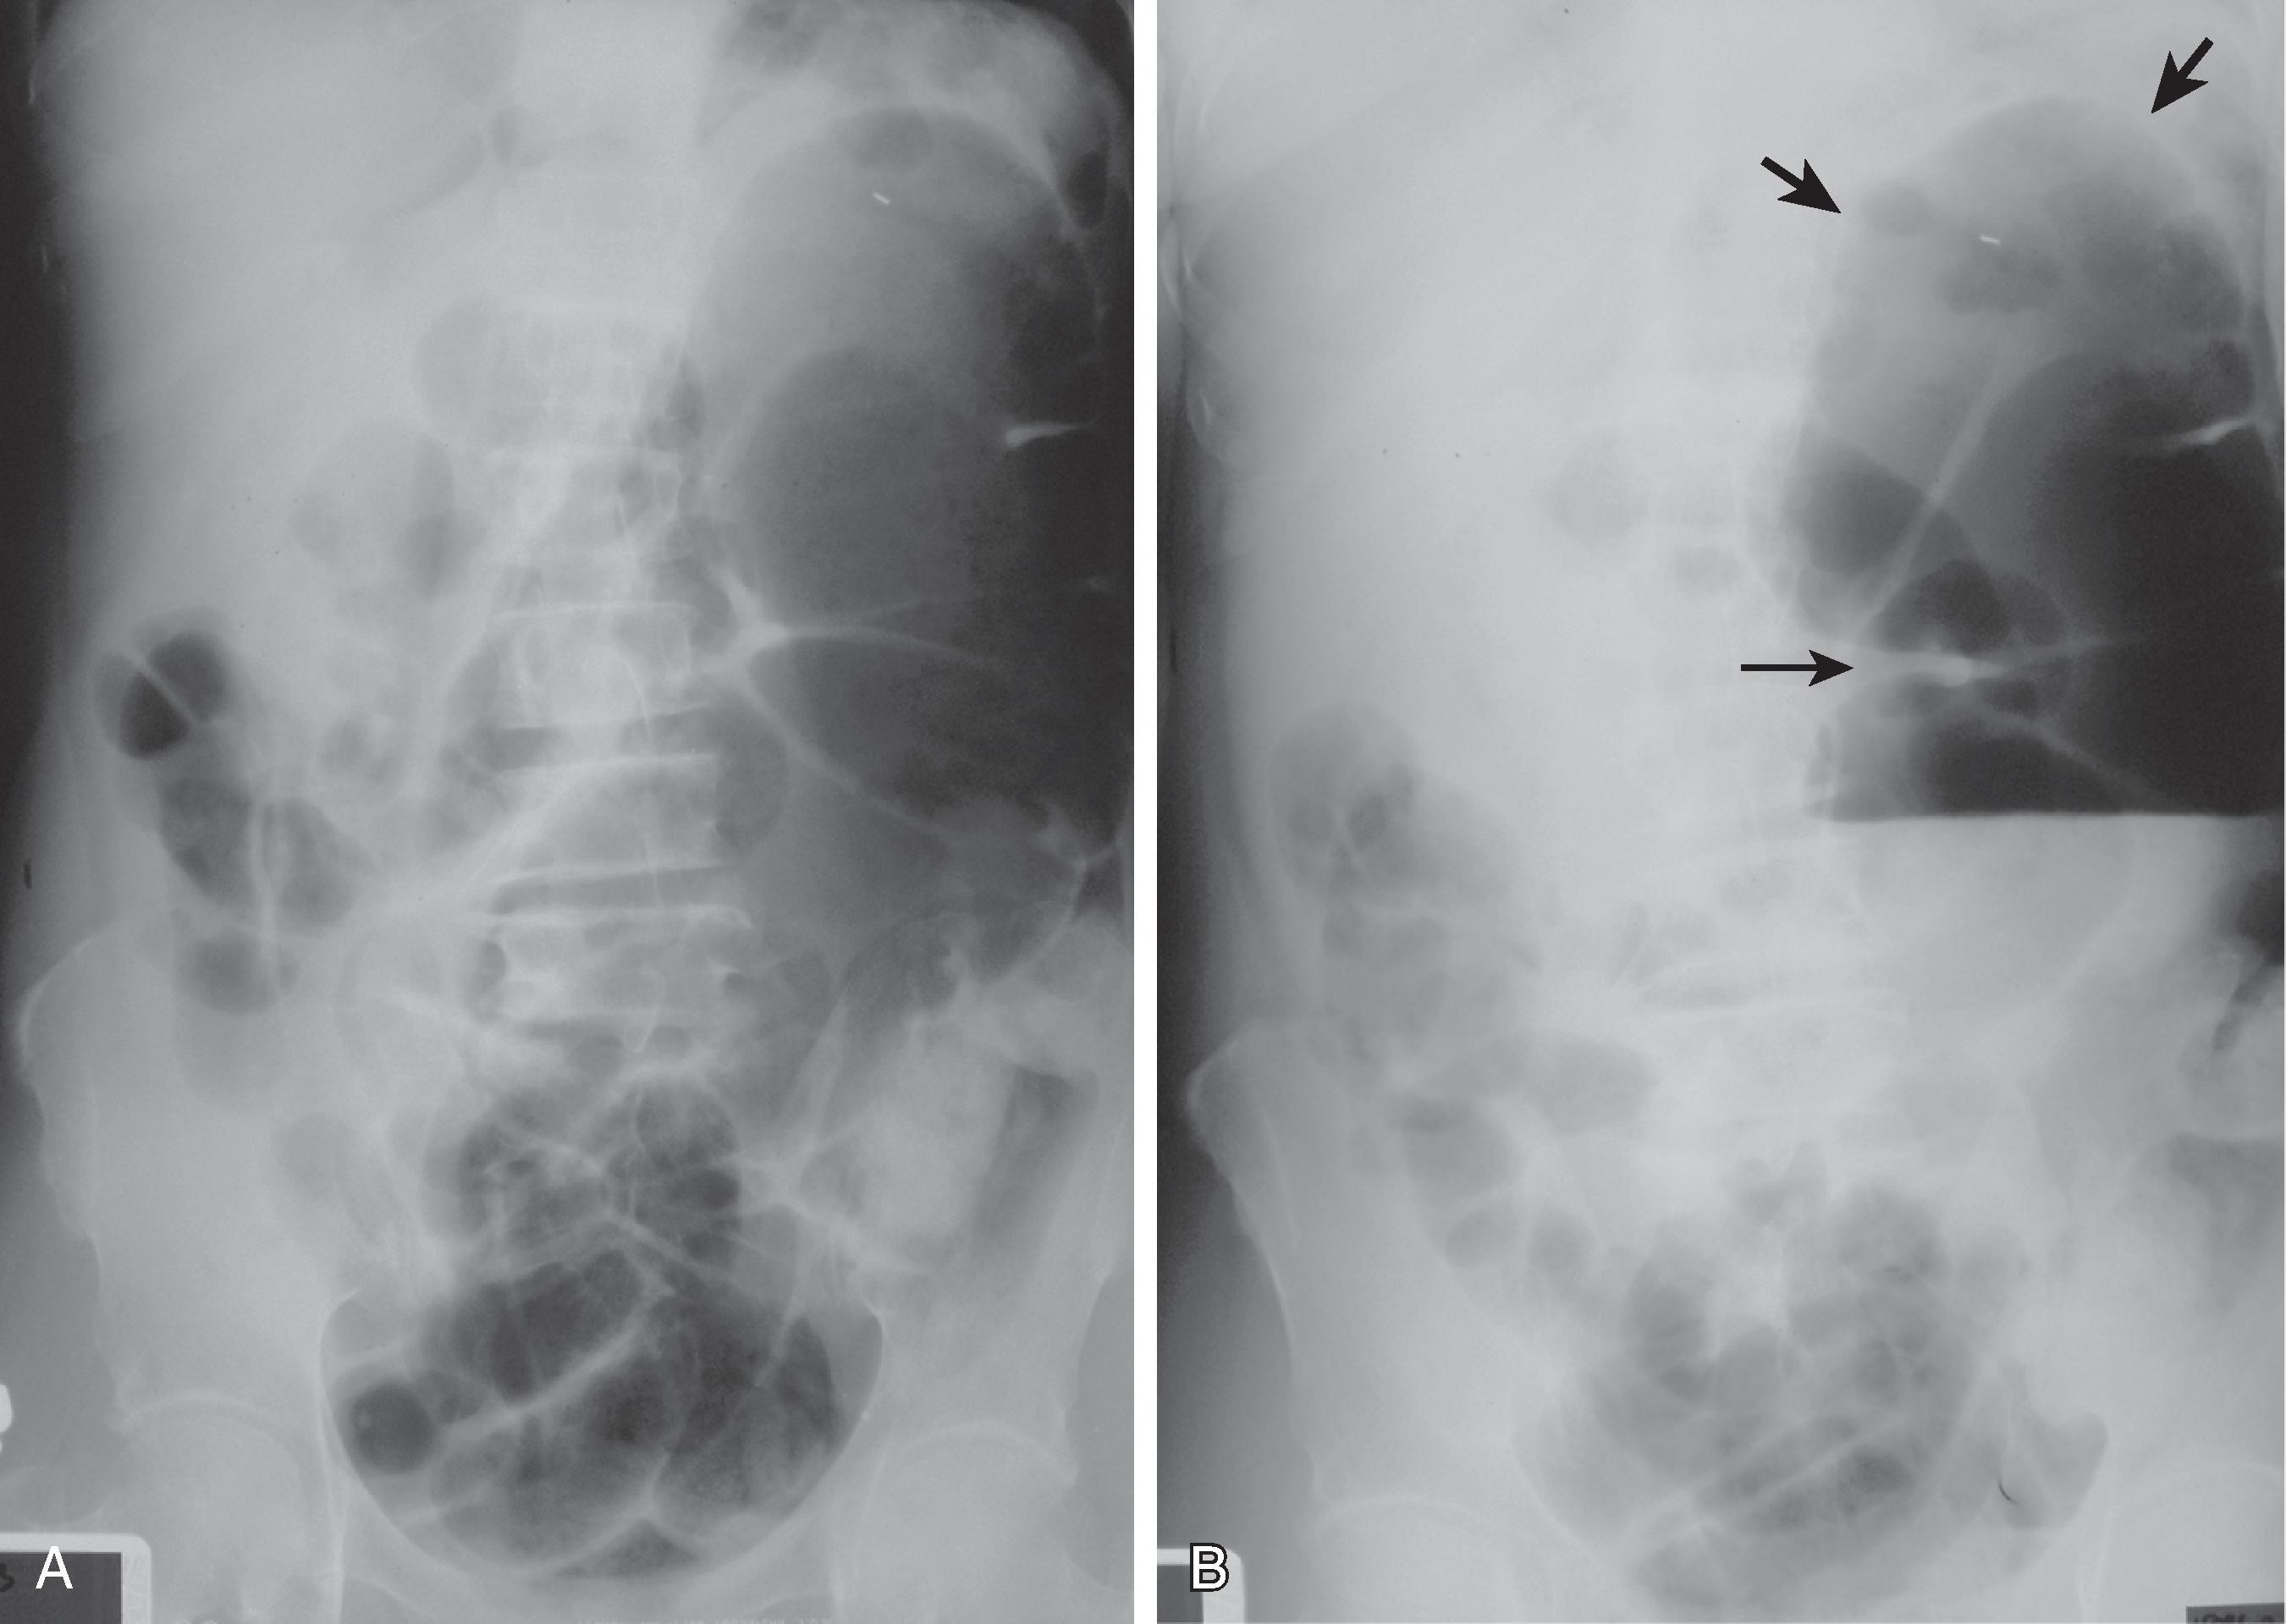 Fig. 2.6, Cecal volvulus. (A) Supine abdominal radiograph shows a markedly dilated viscus in the left upper quadrant, representing the obstructed cecum. Also note multiple loops of dilated small bowel. (B) Upright radiograph shows the caput of the cecum superiorly ( small thick arrows ) and ileocecal valve ( long thin arrow ), with a single air-fluid level in the dilated cecum. These findings are characteristic of cecal volvulus.